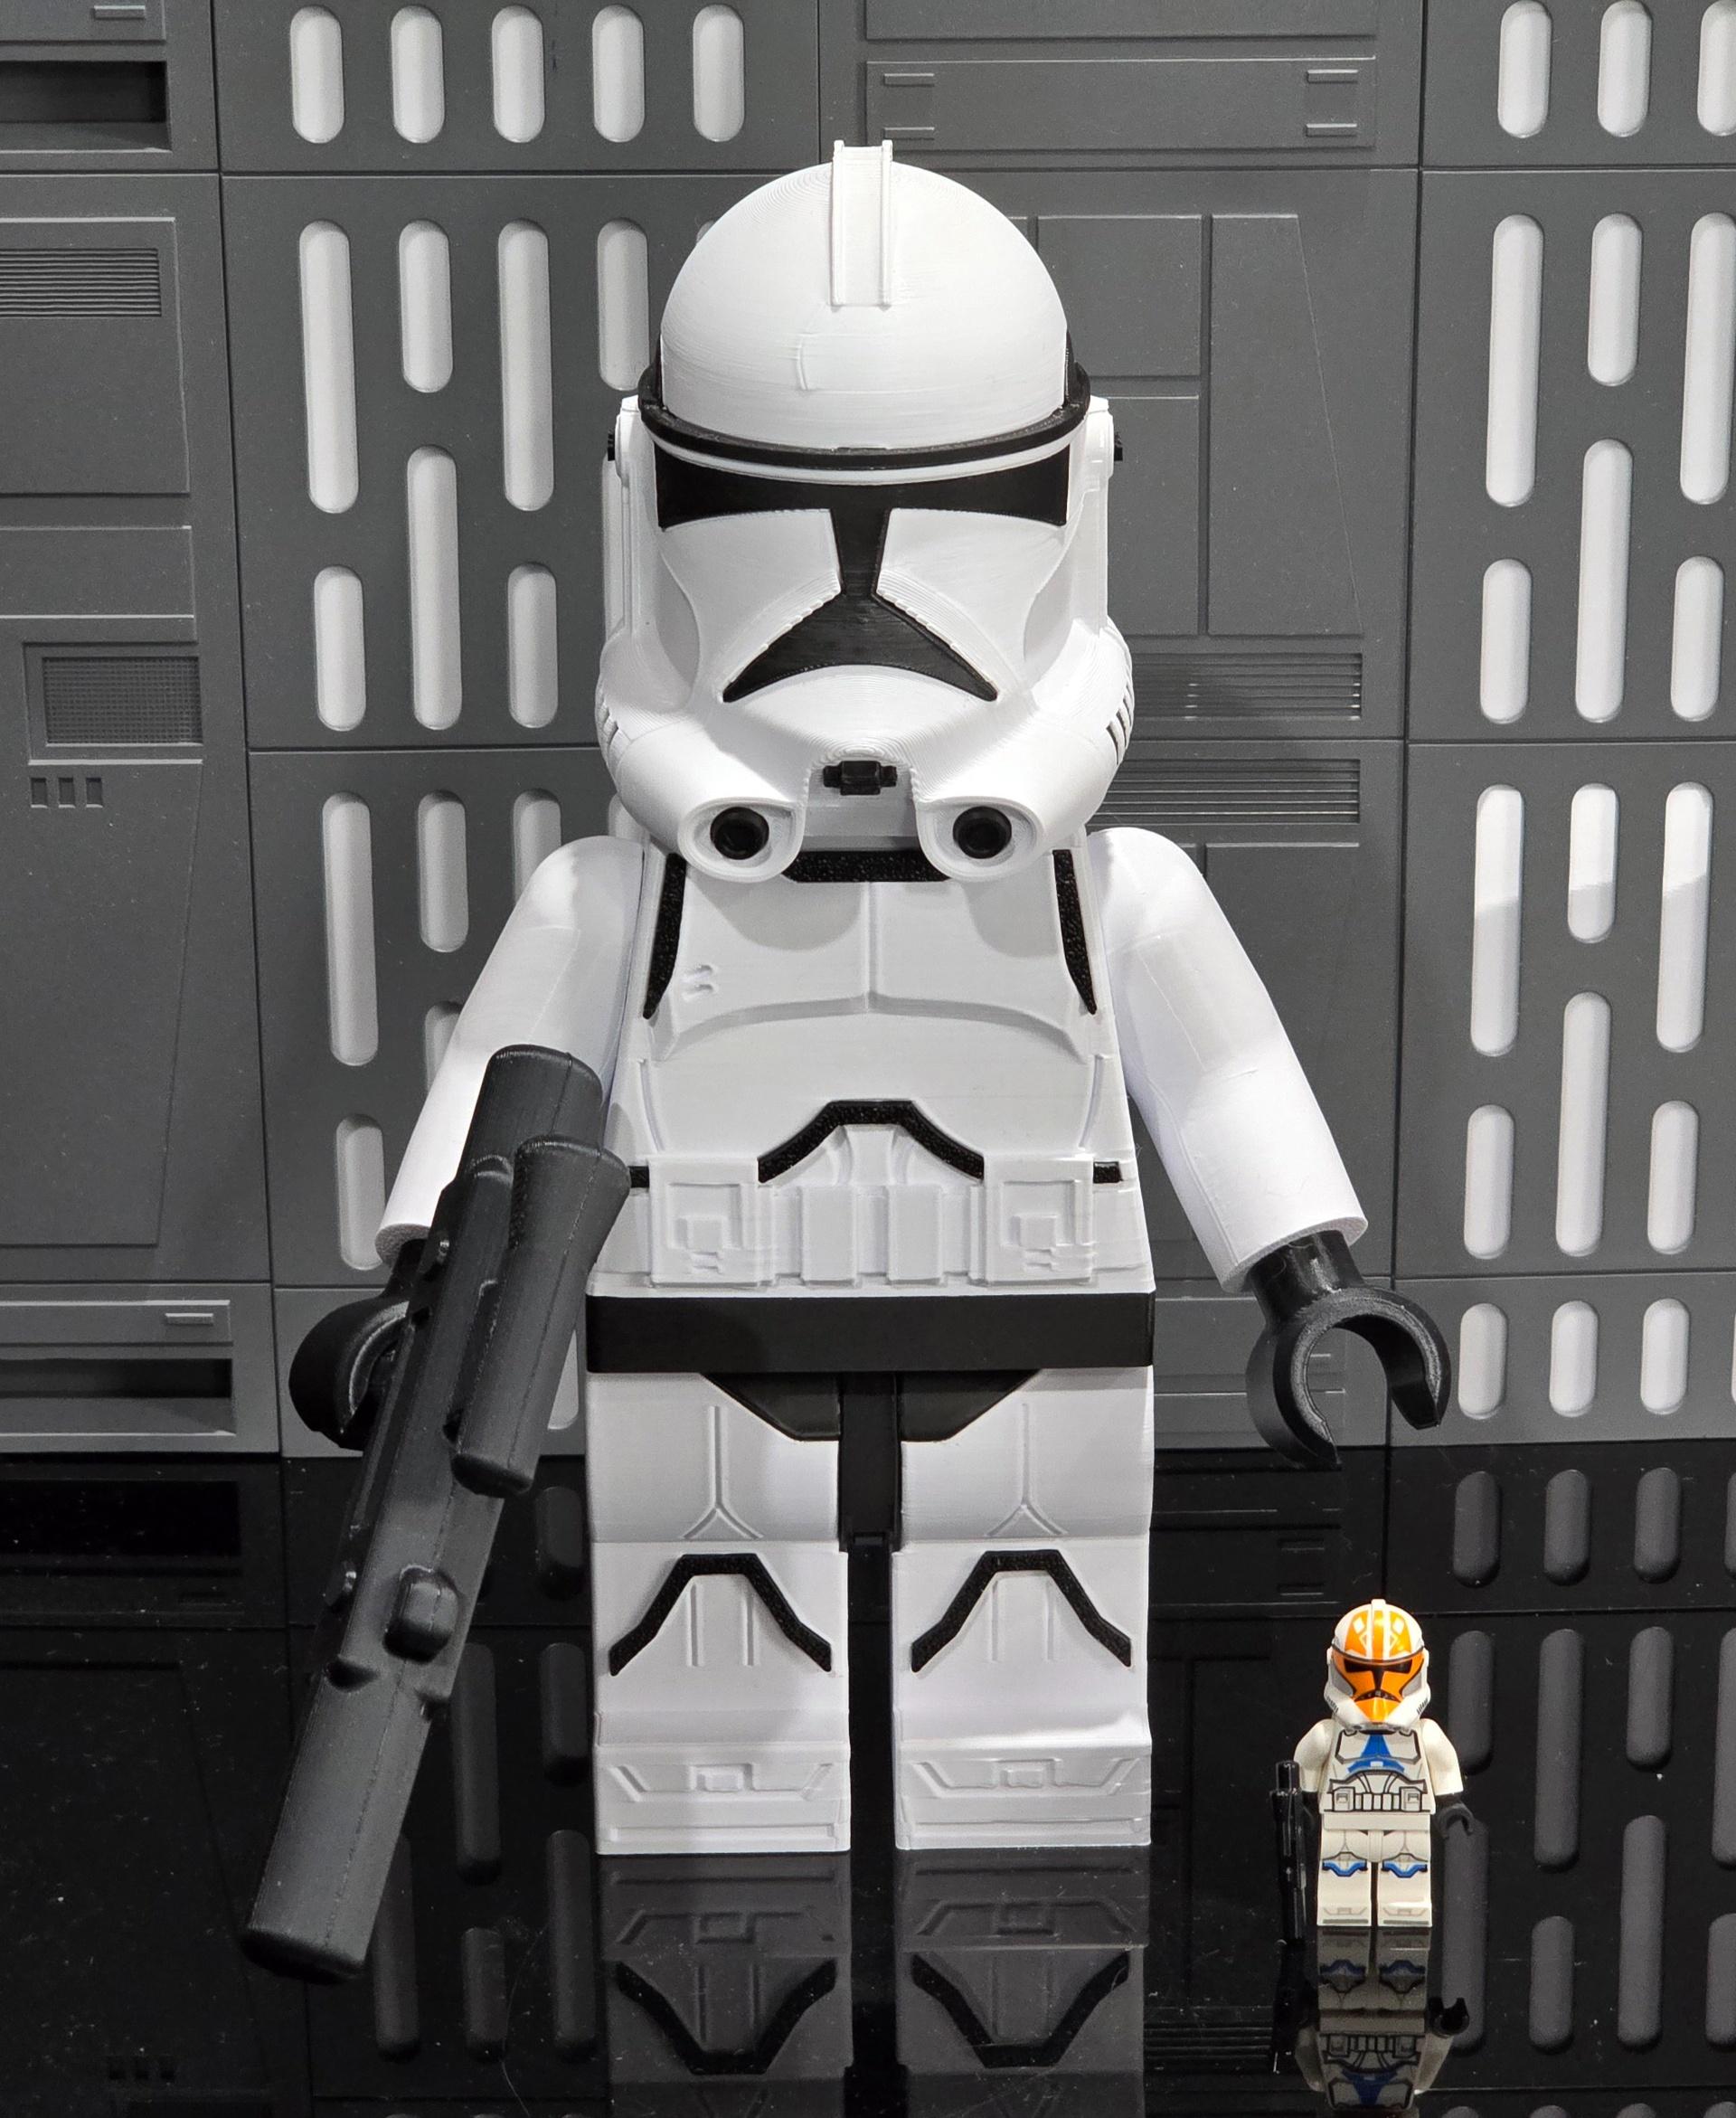 Clone Trooper - Phase II (6:1 LEGO-inspired brick figure, NO MMU/AMS, NO supports, NO glue) - "I've got clones. They're multiplying. And I'm losing control." - 3d model